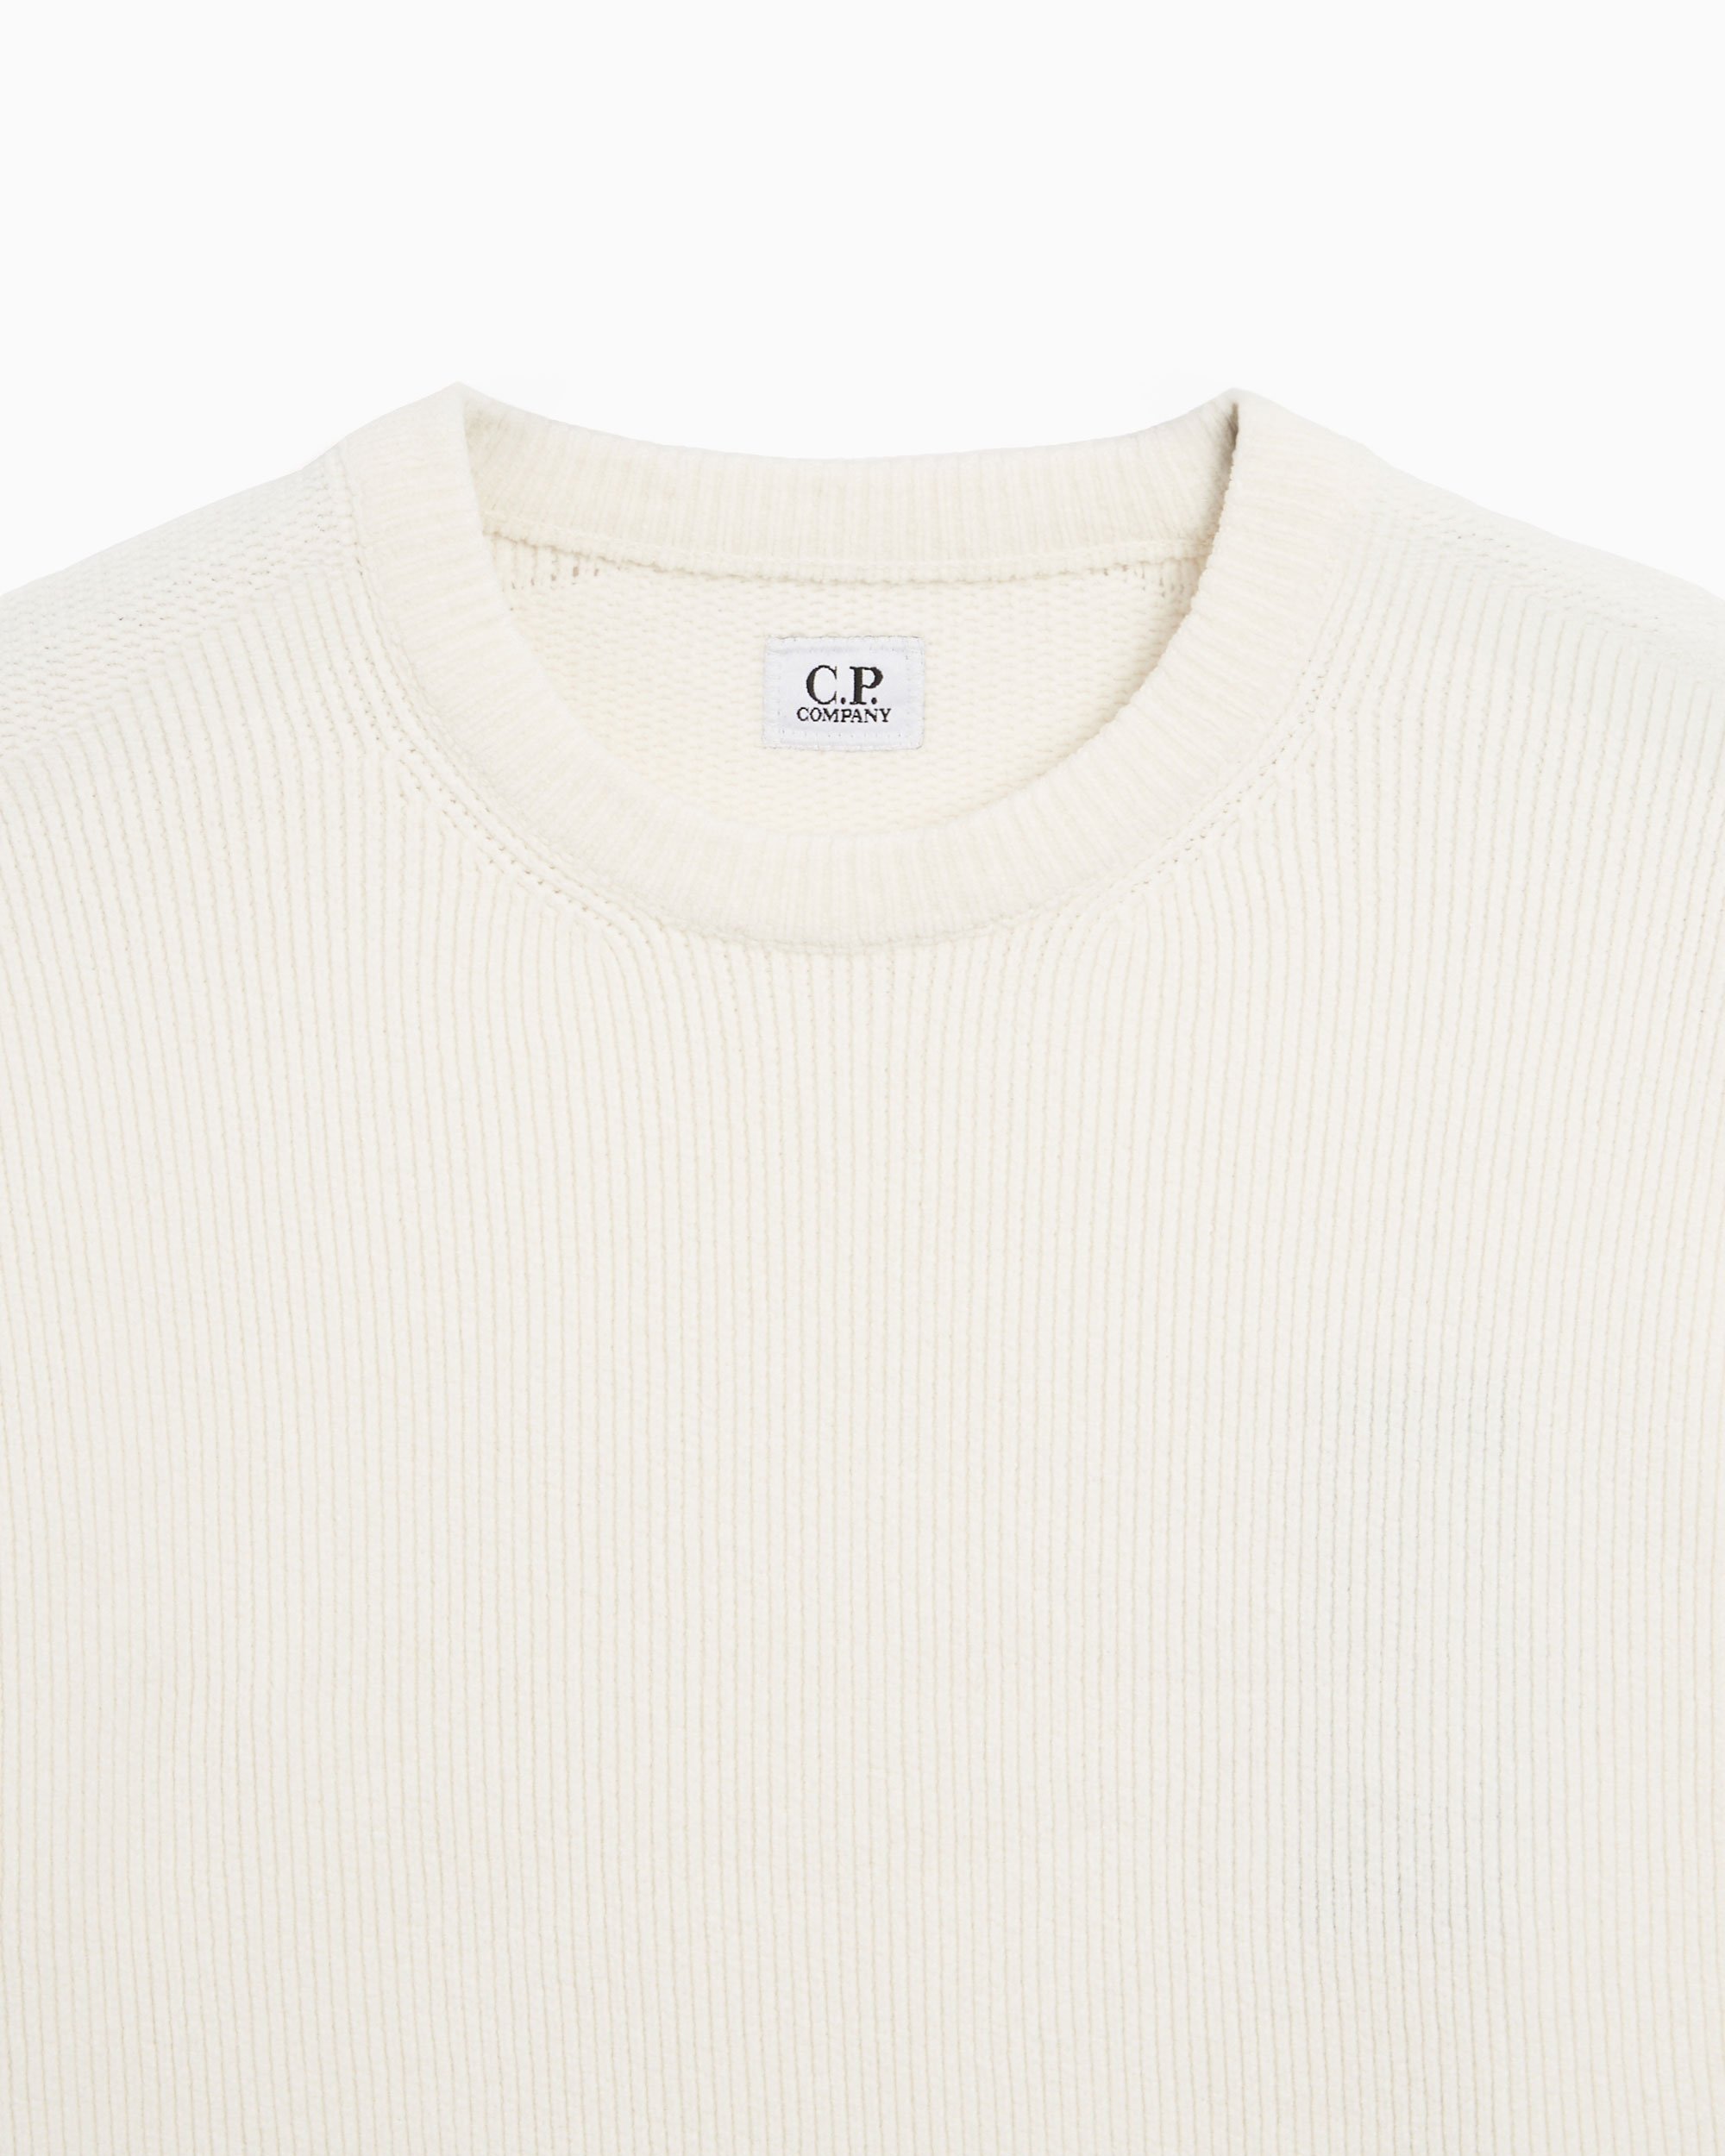 CP Company Men's Knit Sweater White 16CMKN043A005687G-103| Buy 